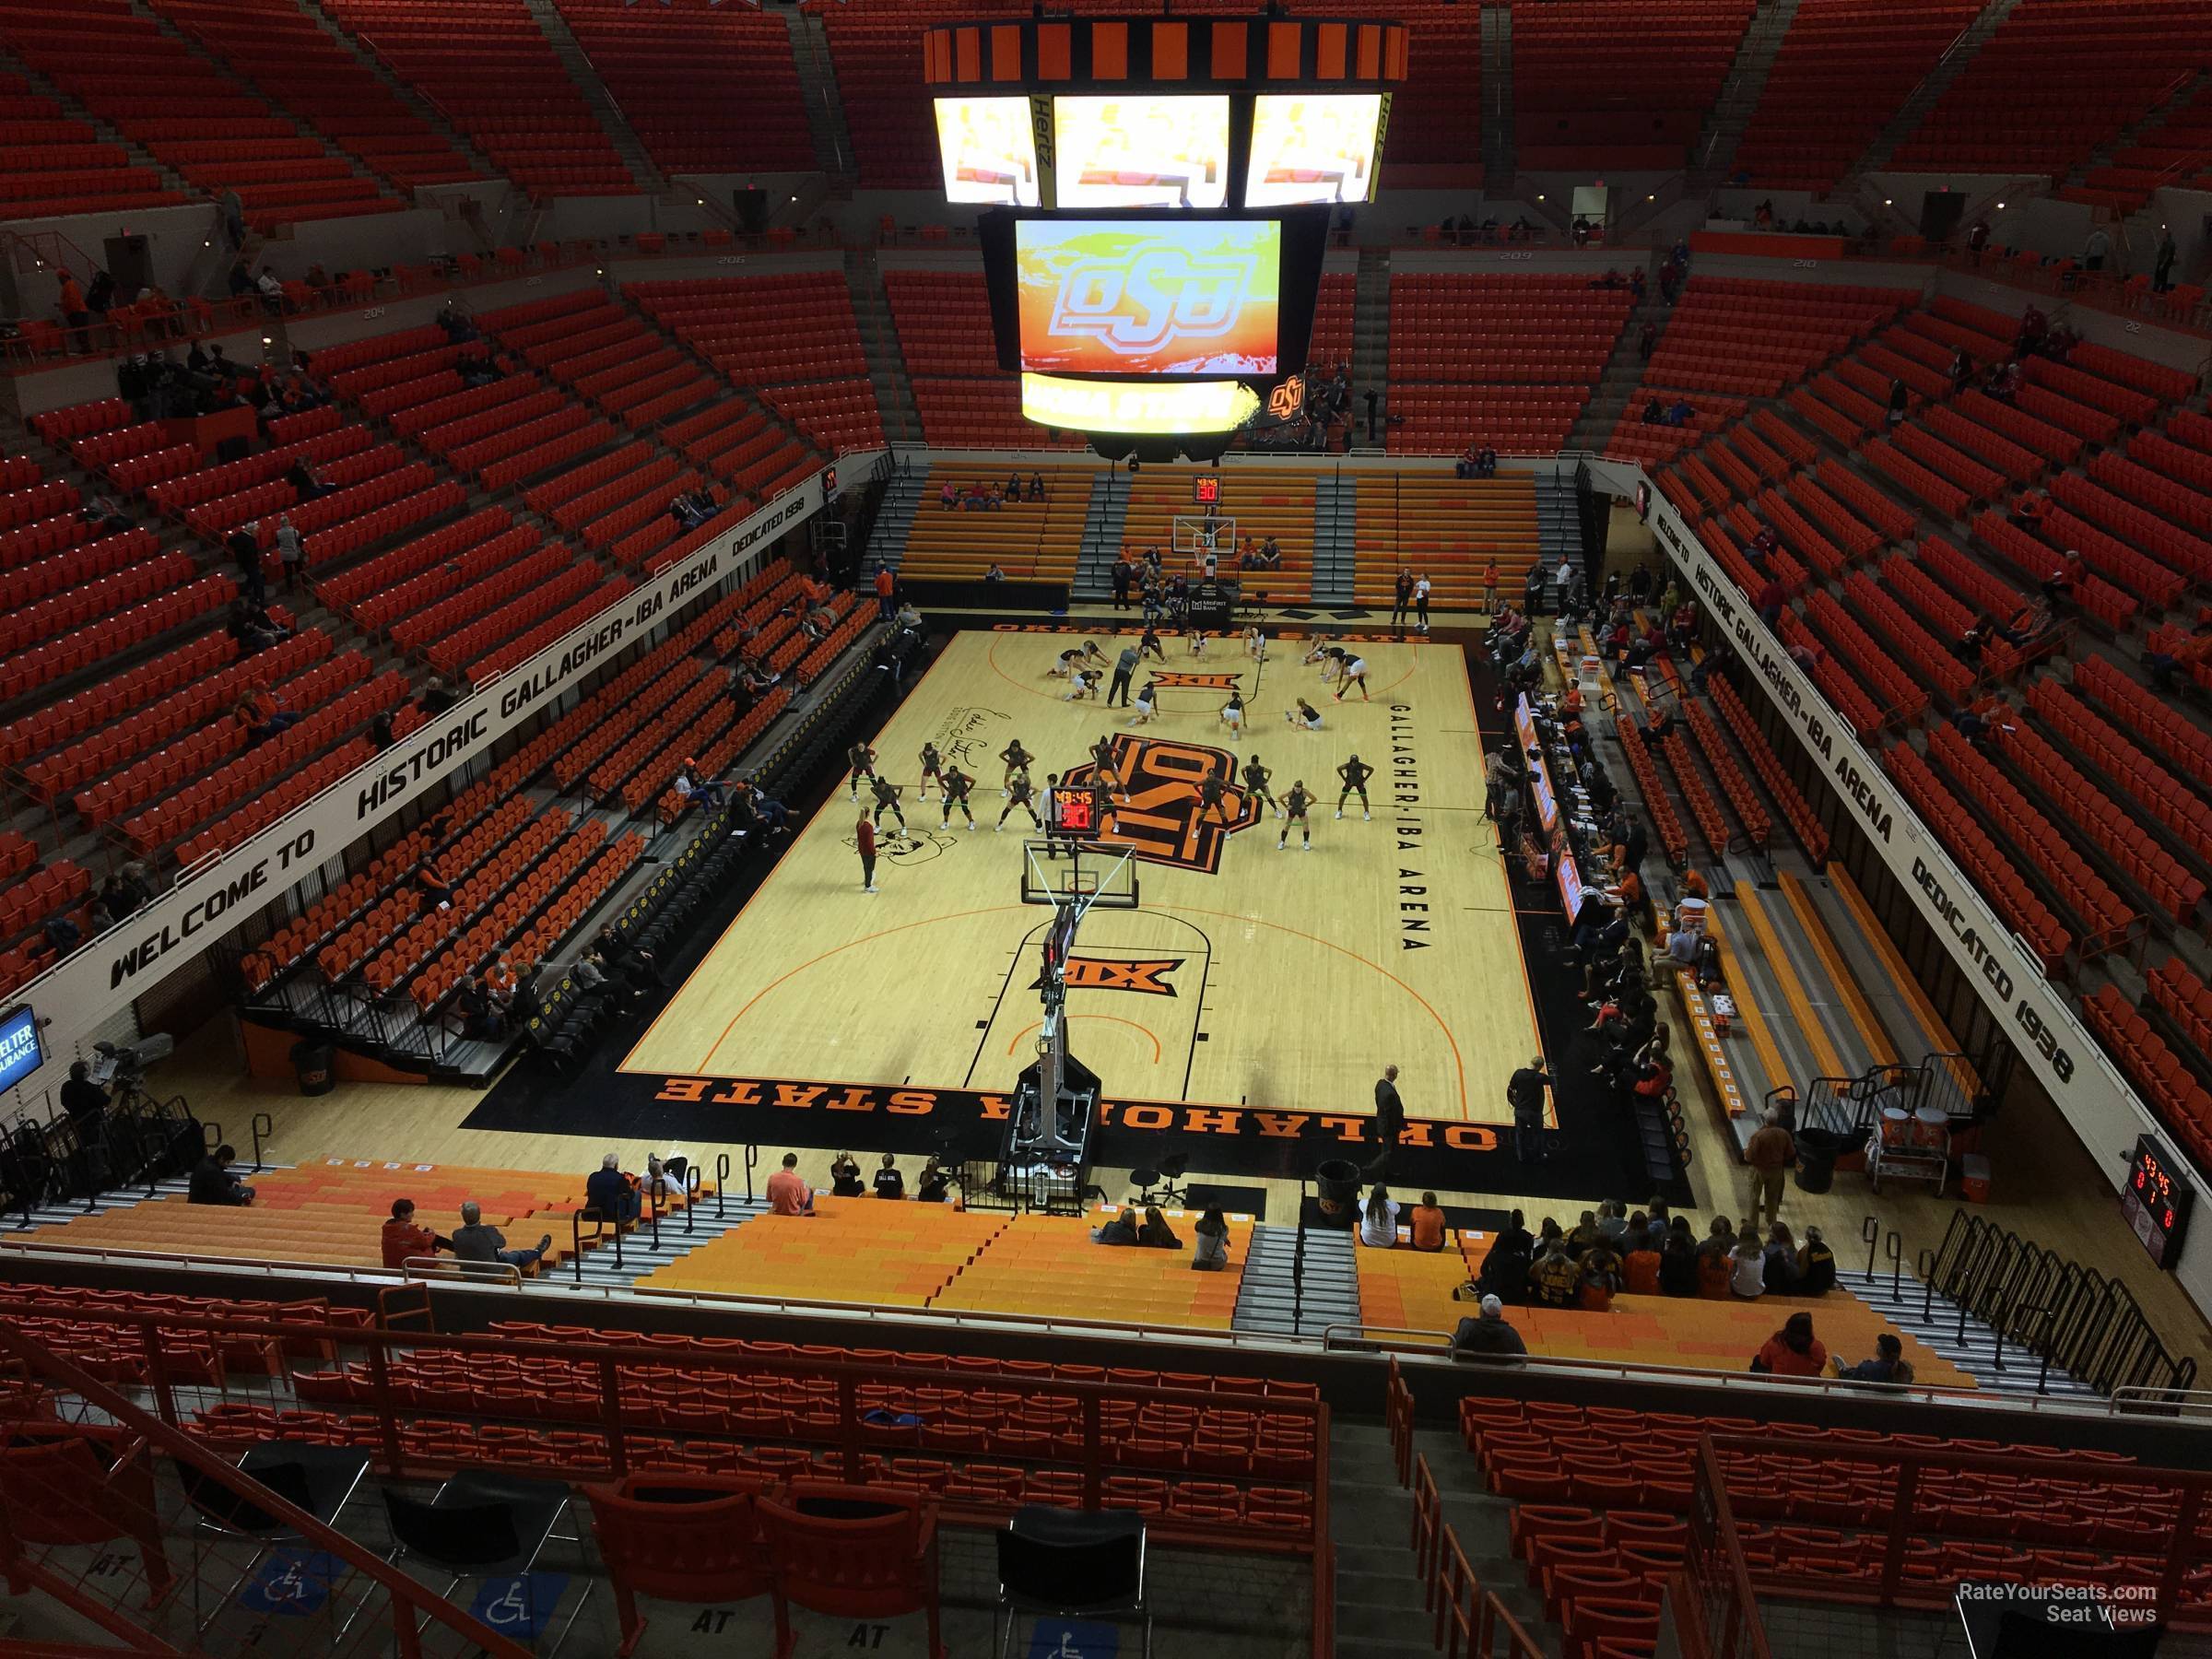 section 324, row 5 seat view  - gallagher-iba arena